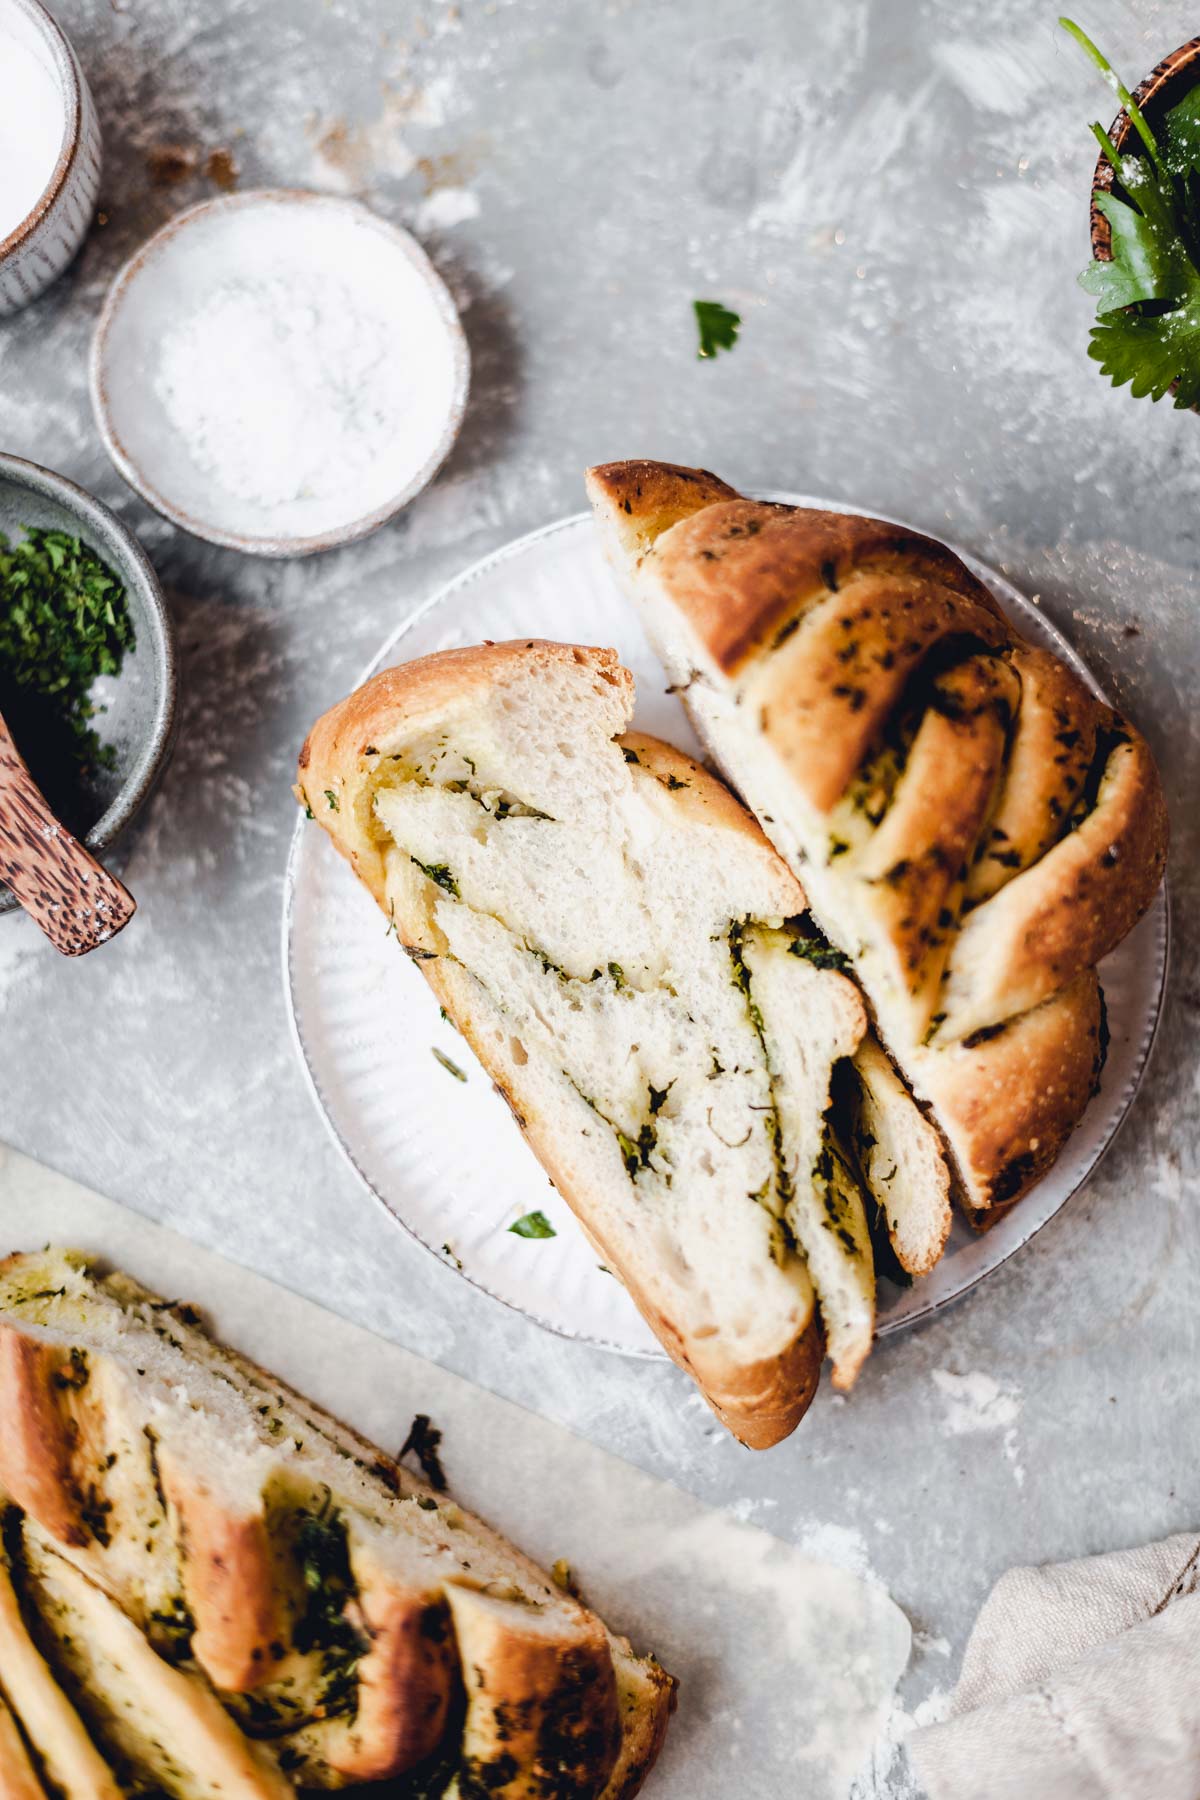 A slice of garlic twisted bread with herbs on a round plate.